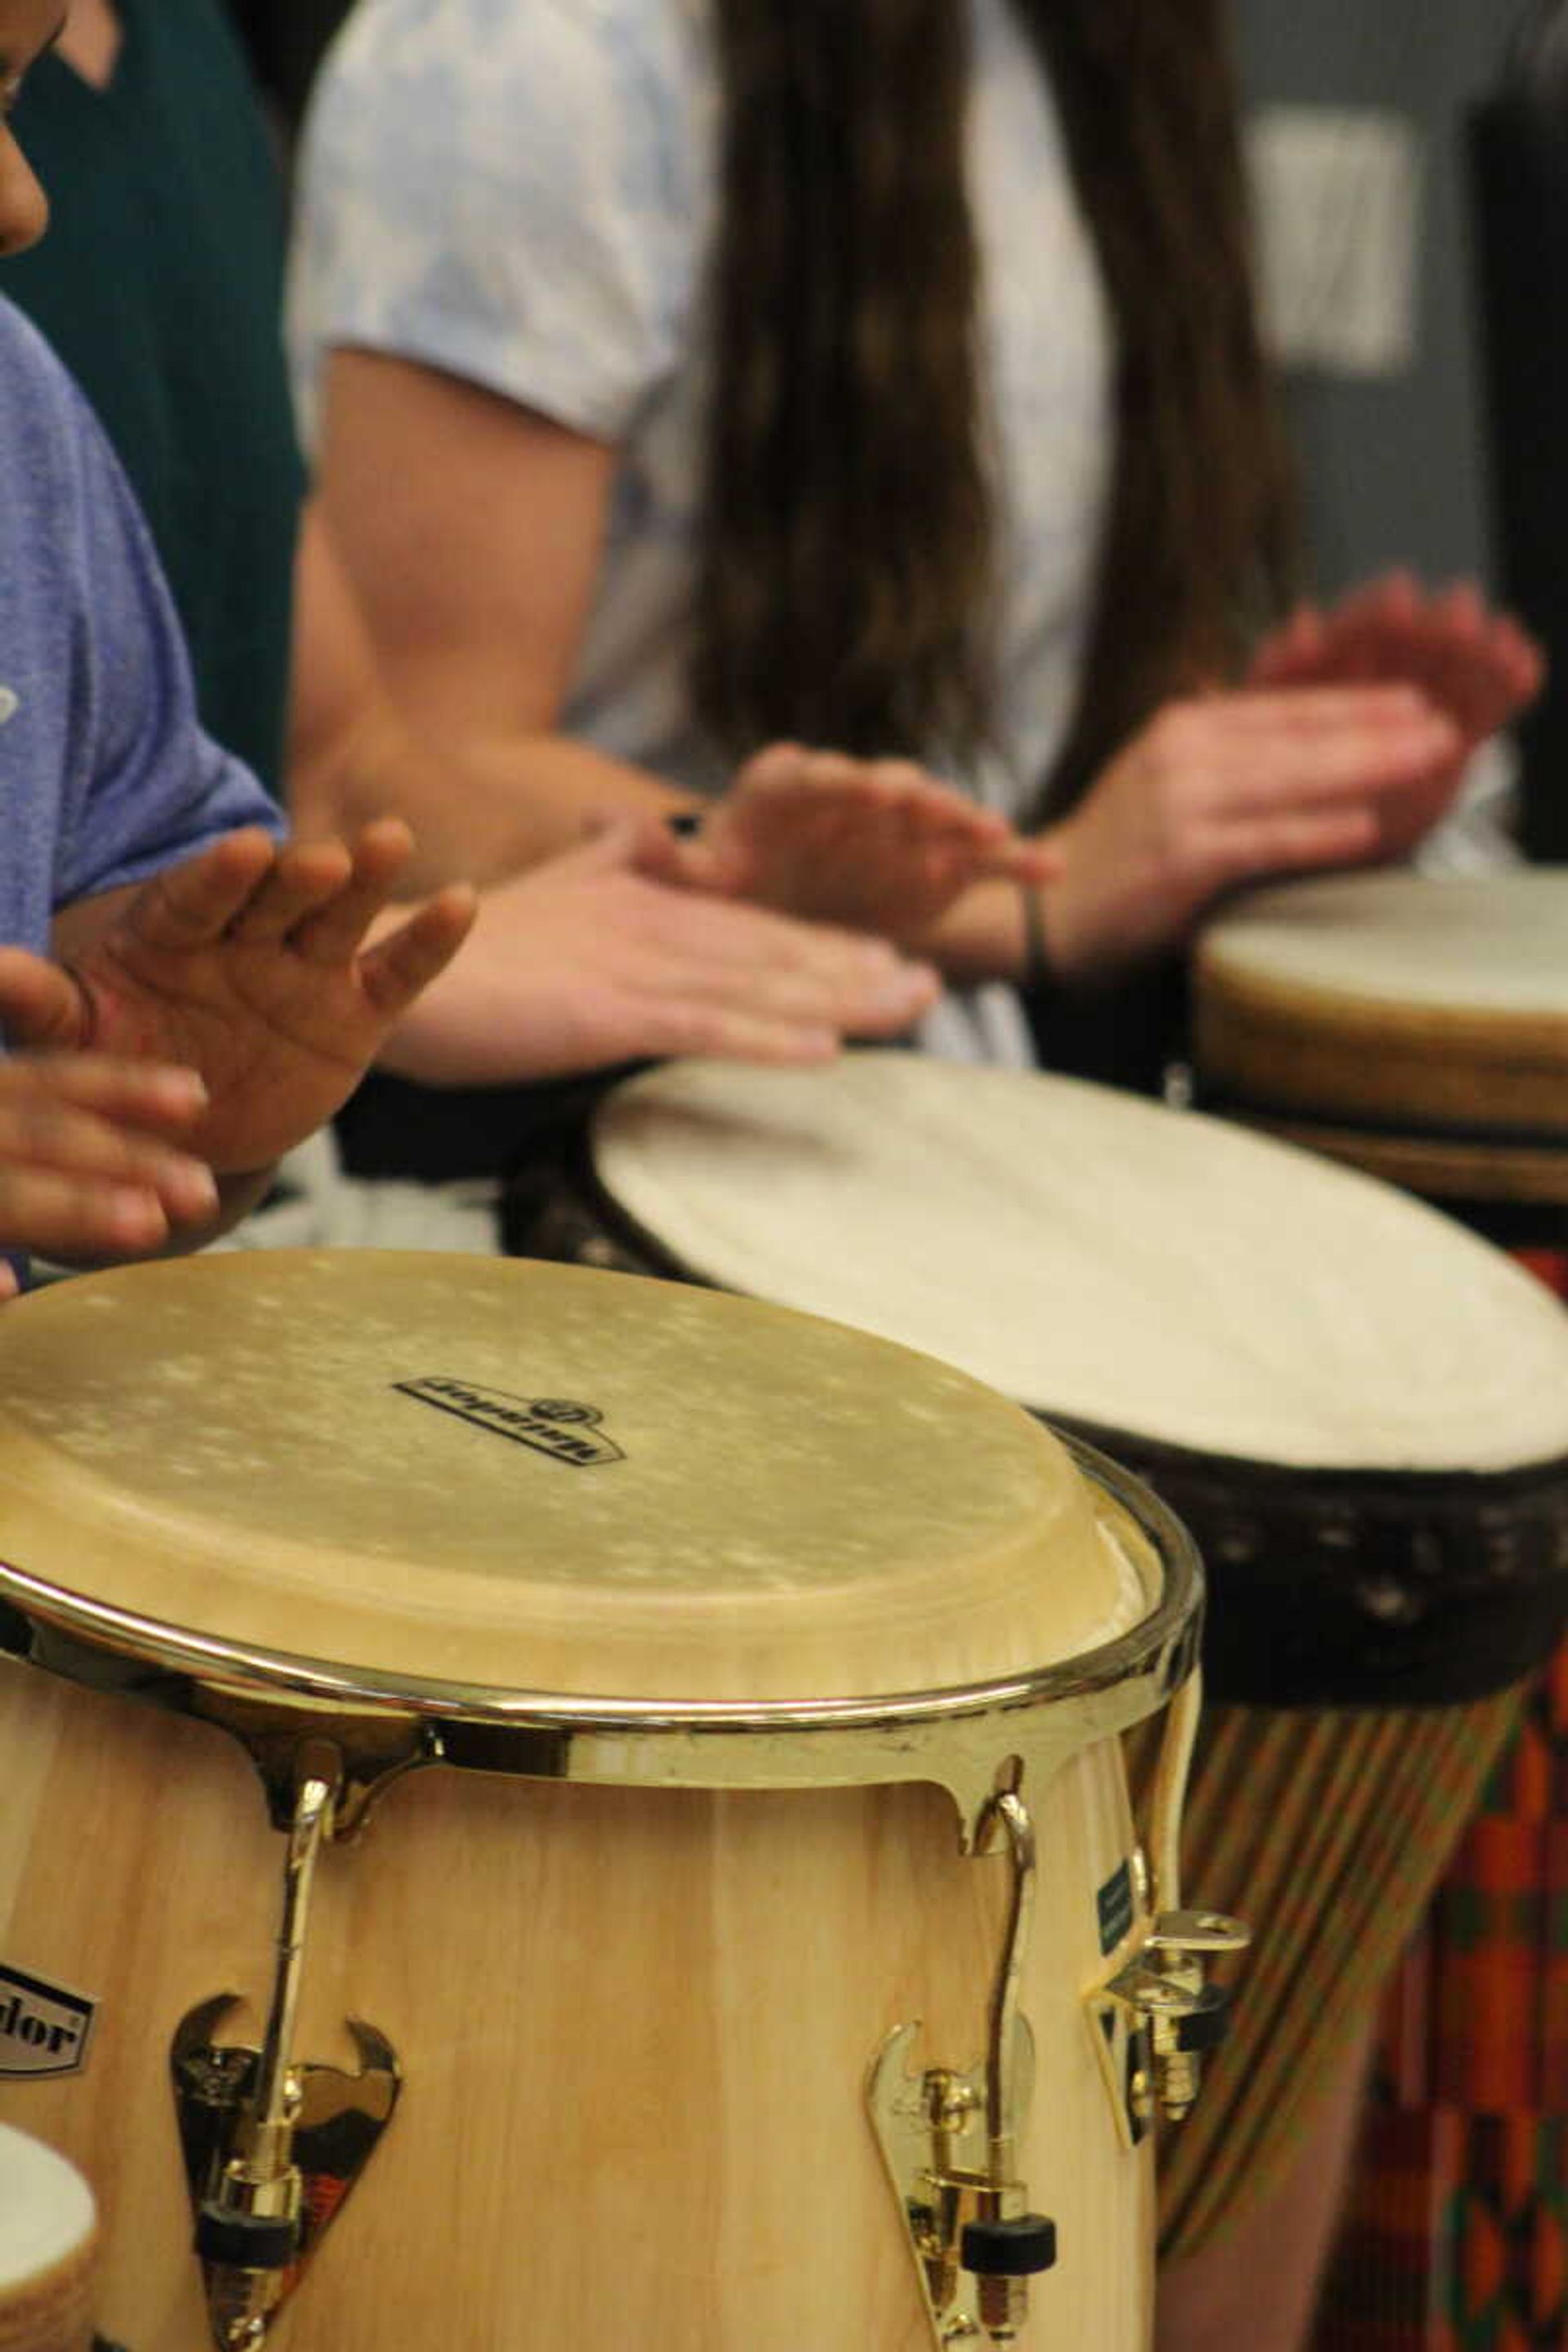 Drum Circle participants play at the Drum Circle event on Sept. 11.